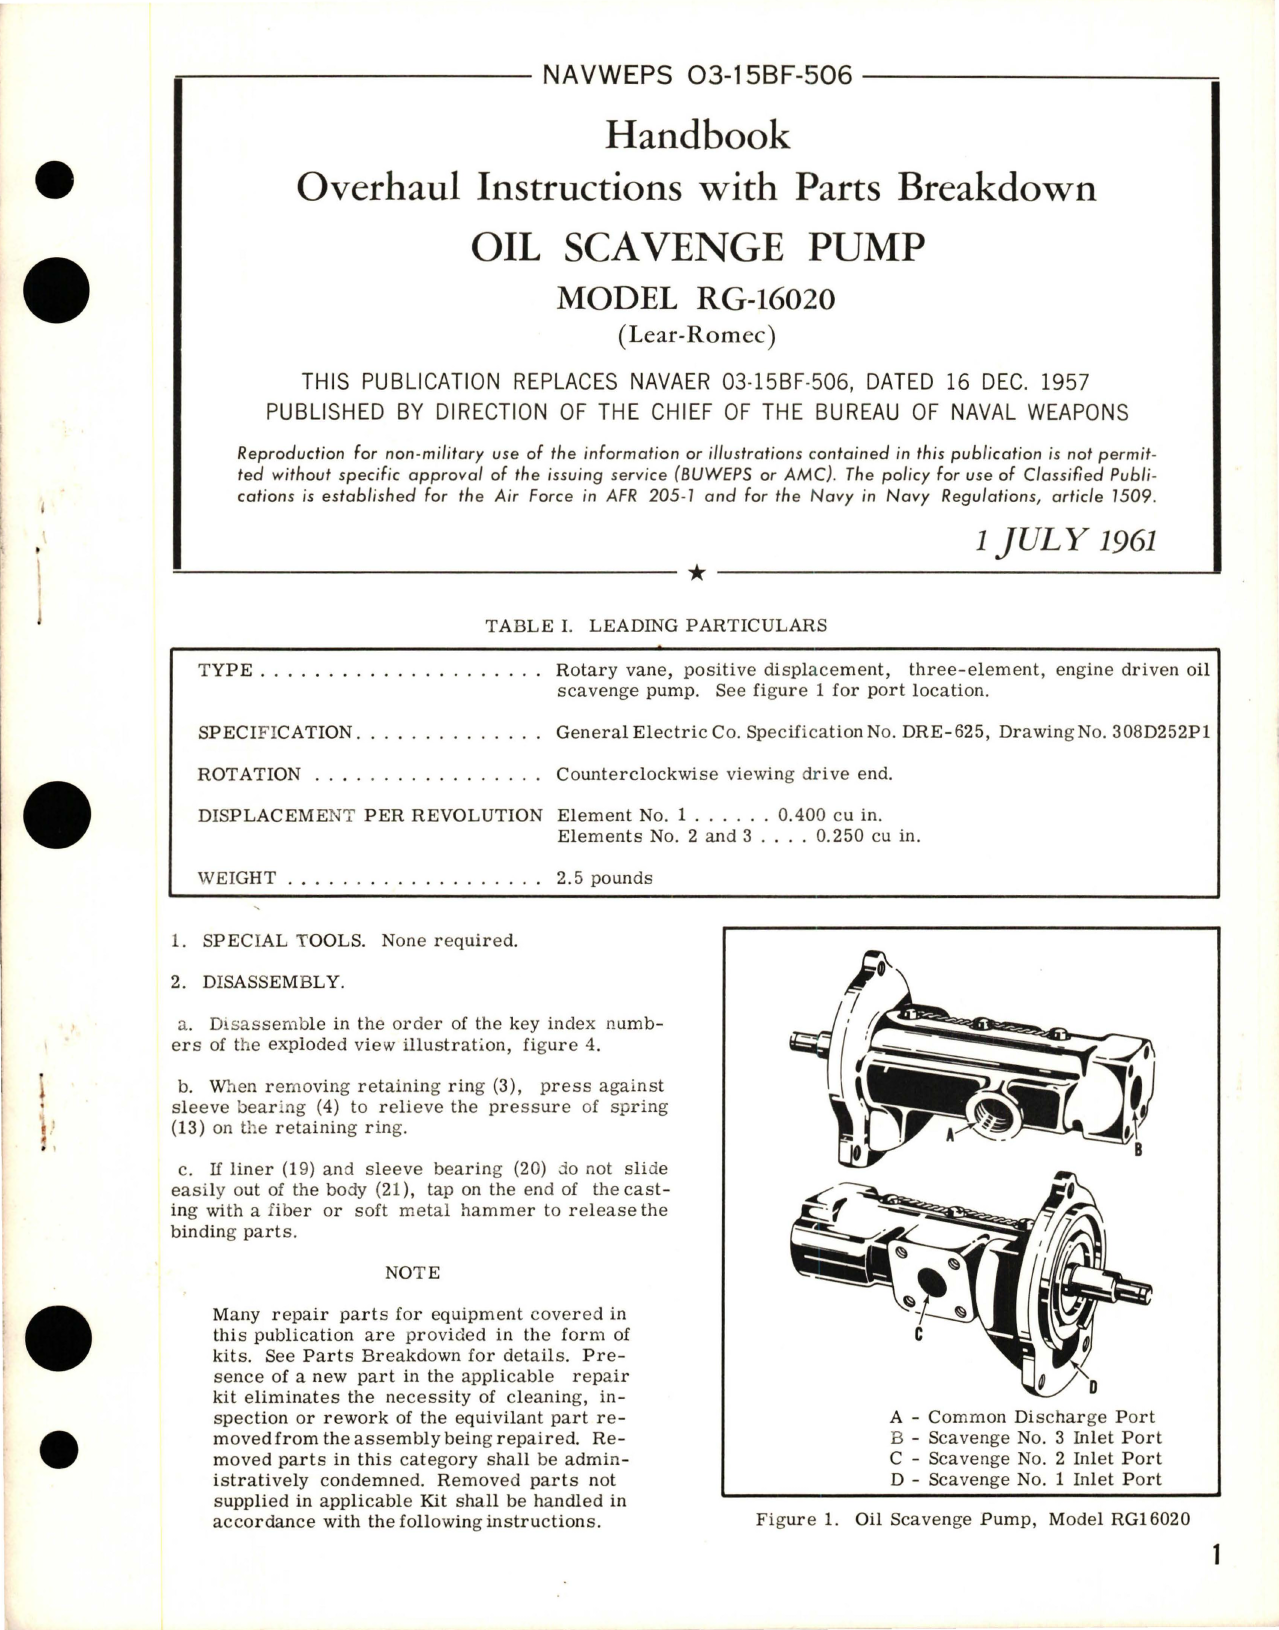 Sample page 1 from AirCorps Library document: Overhaul Instructions with Parts for Oil Scavenge Pump - Model RG-16020